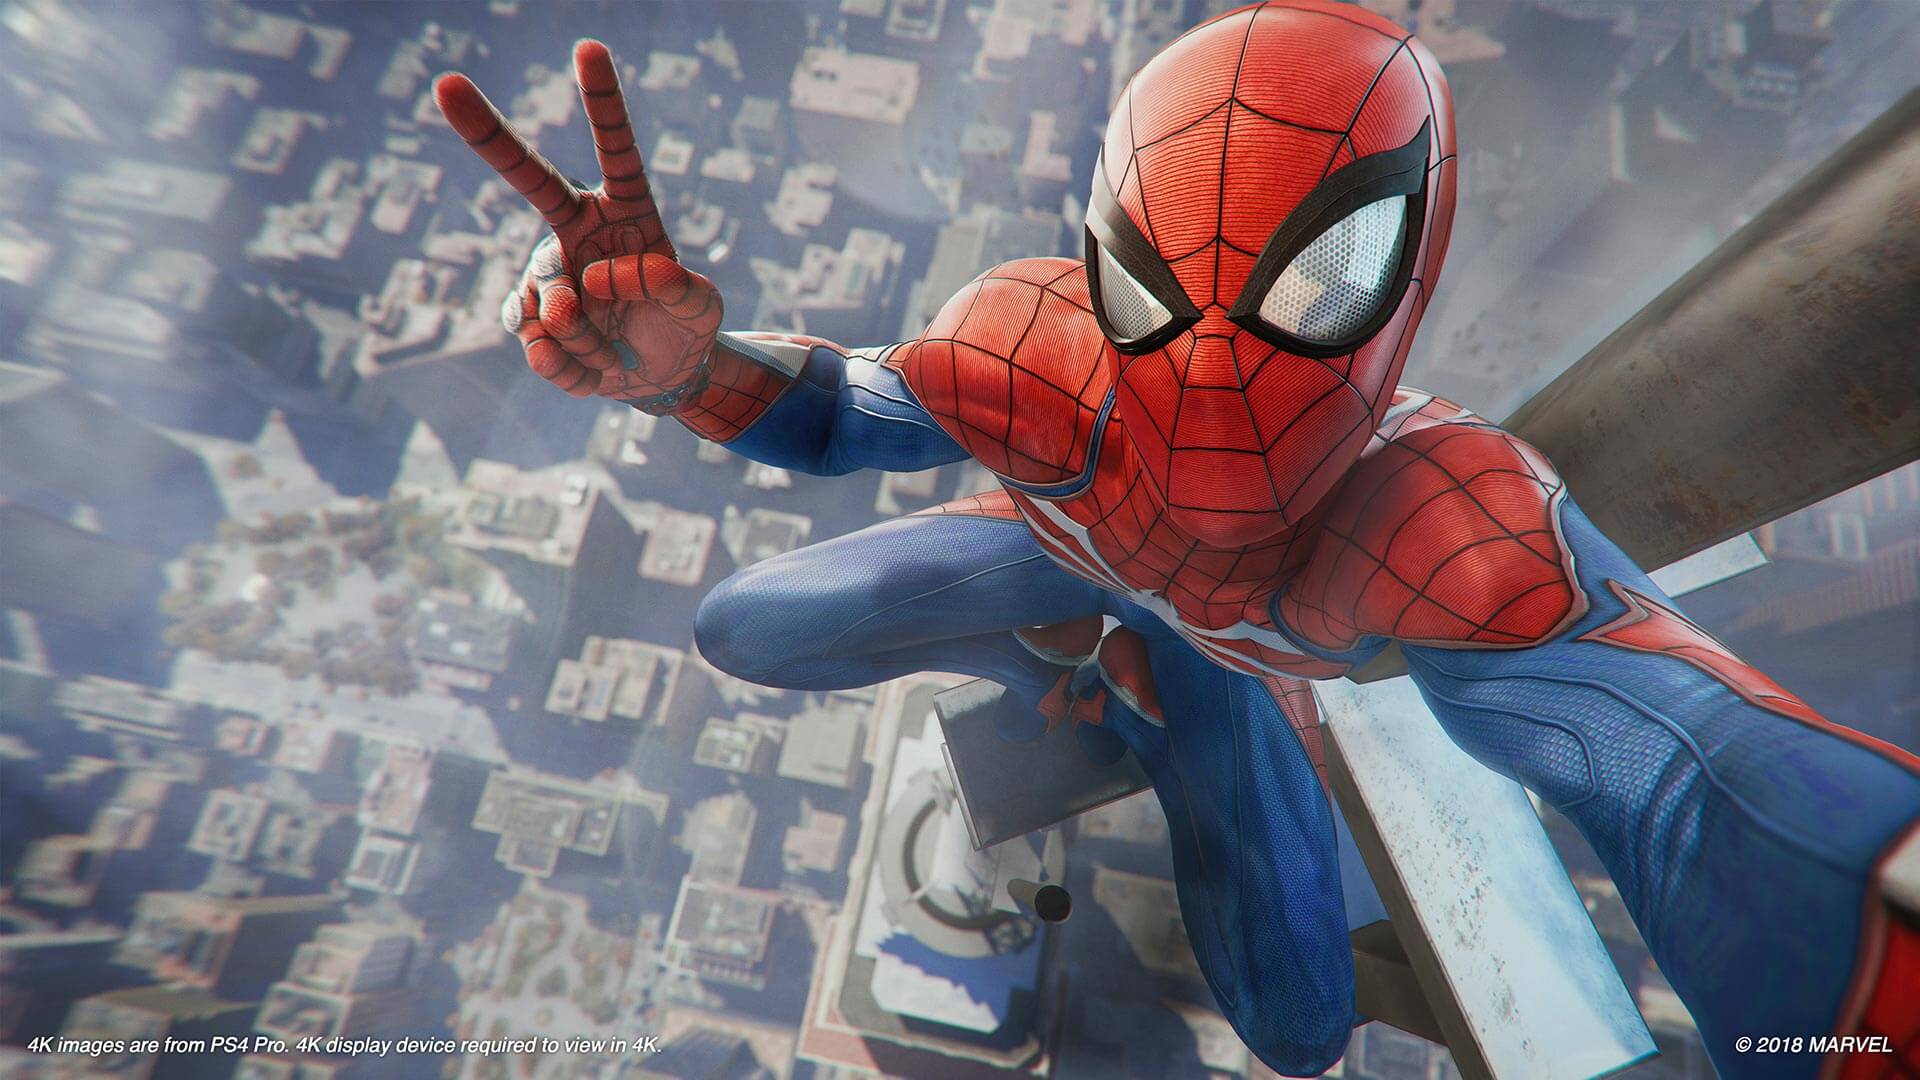 Insomniac Announces Marvel's Spider-Man DLC and Game Length - Geeks + Gamers